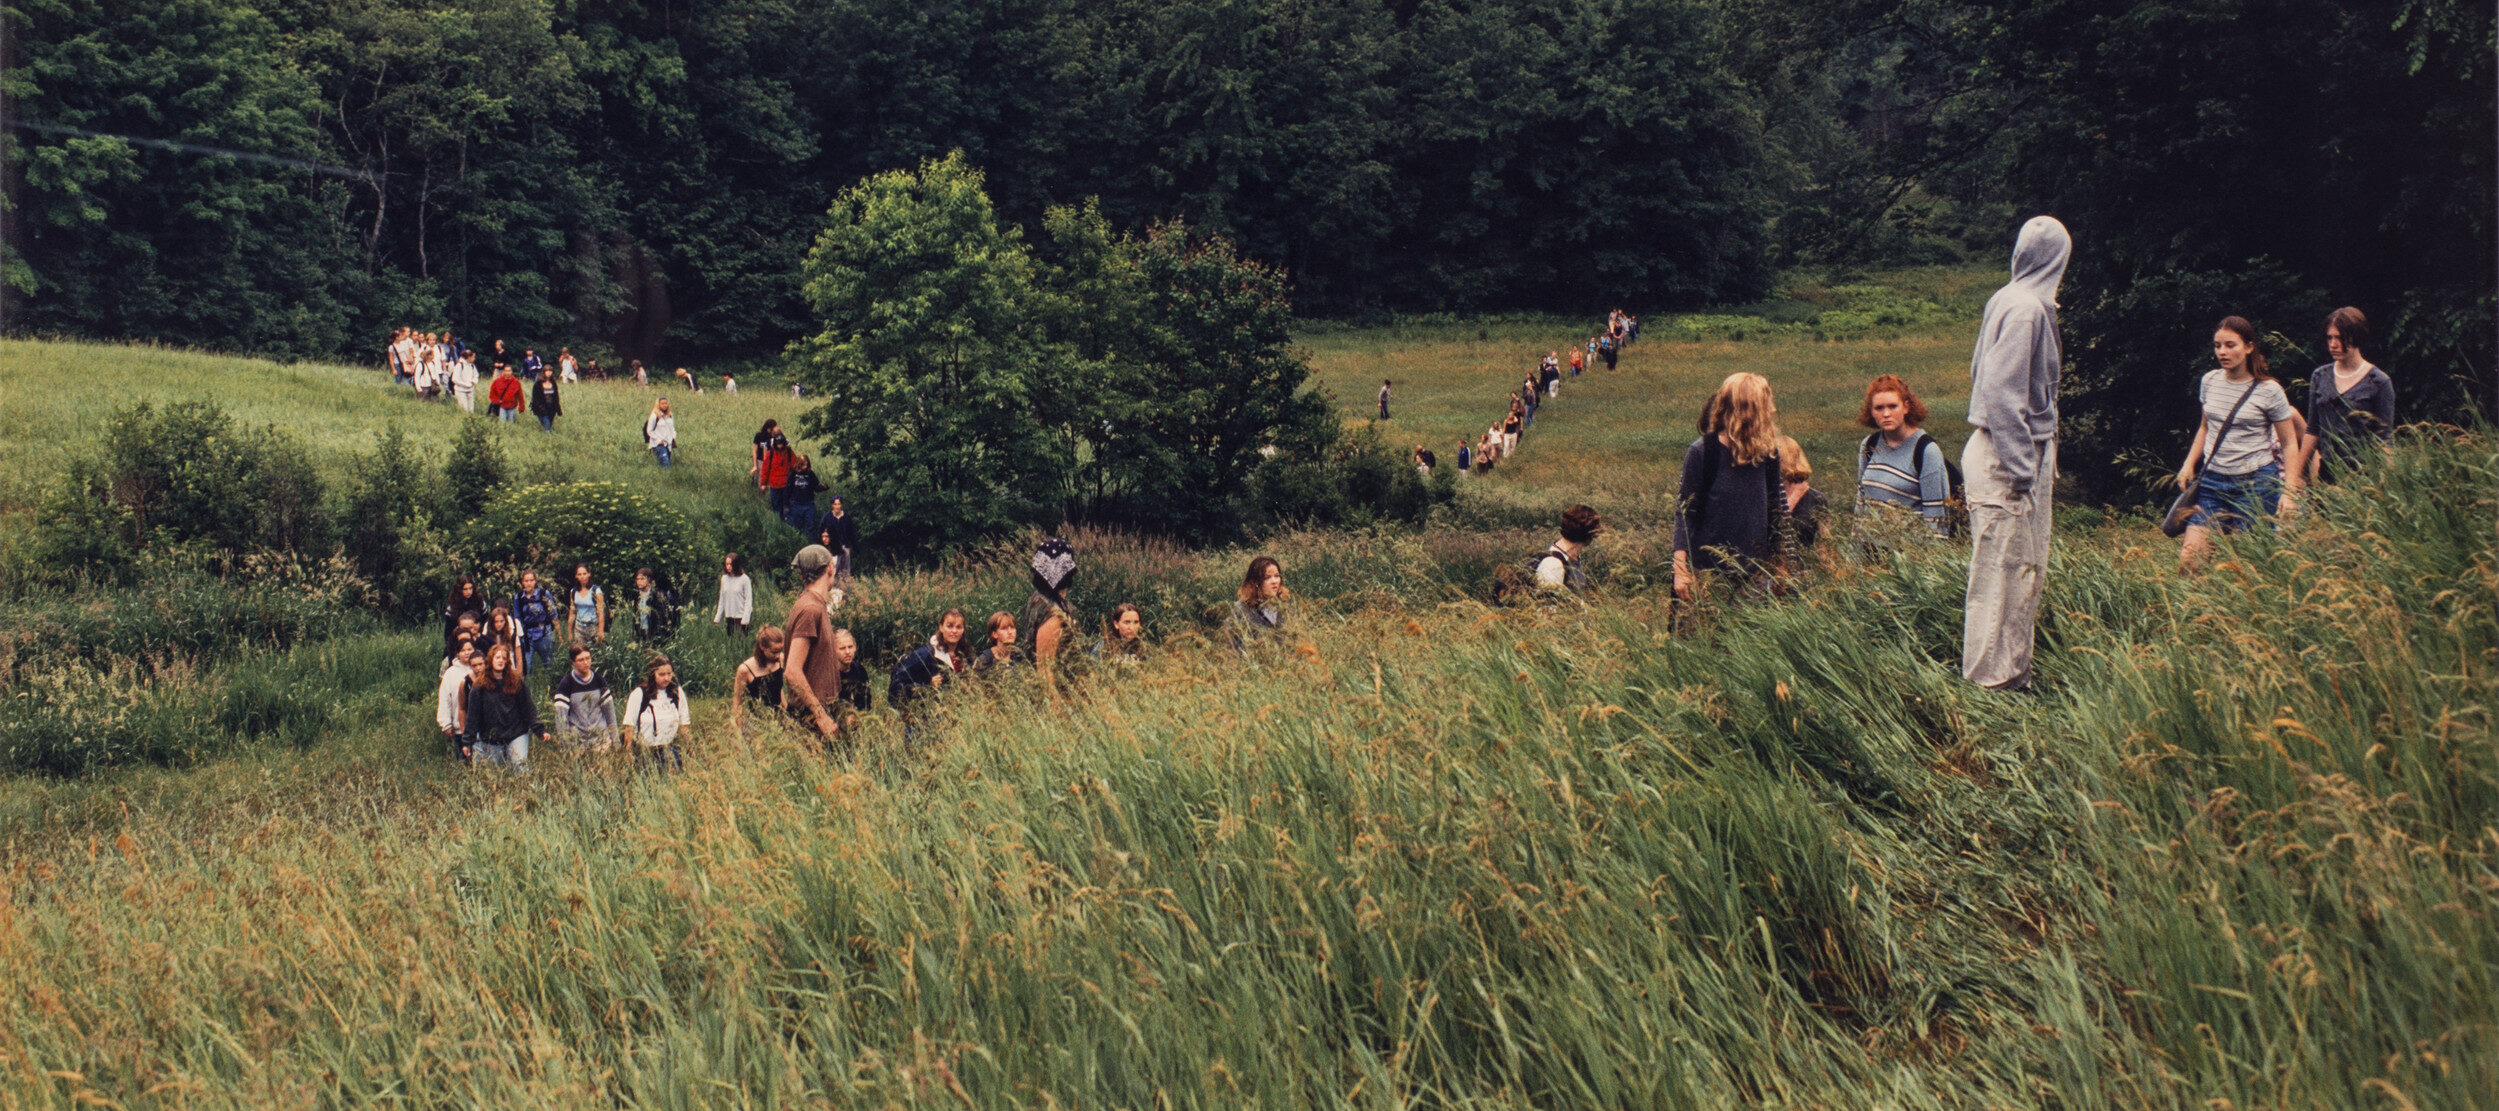 A landscape photograph featuring a field of tall green grass surrounded by leafy trees and a grey sky. A large group of people of varying ages traverse the field on foot. In the background the people form two lines, and a smaller group is congregated in the foreground.